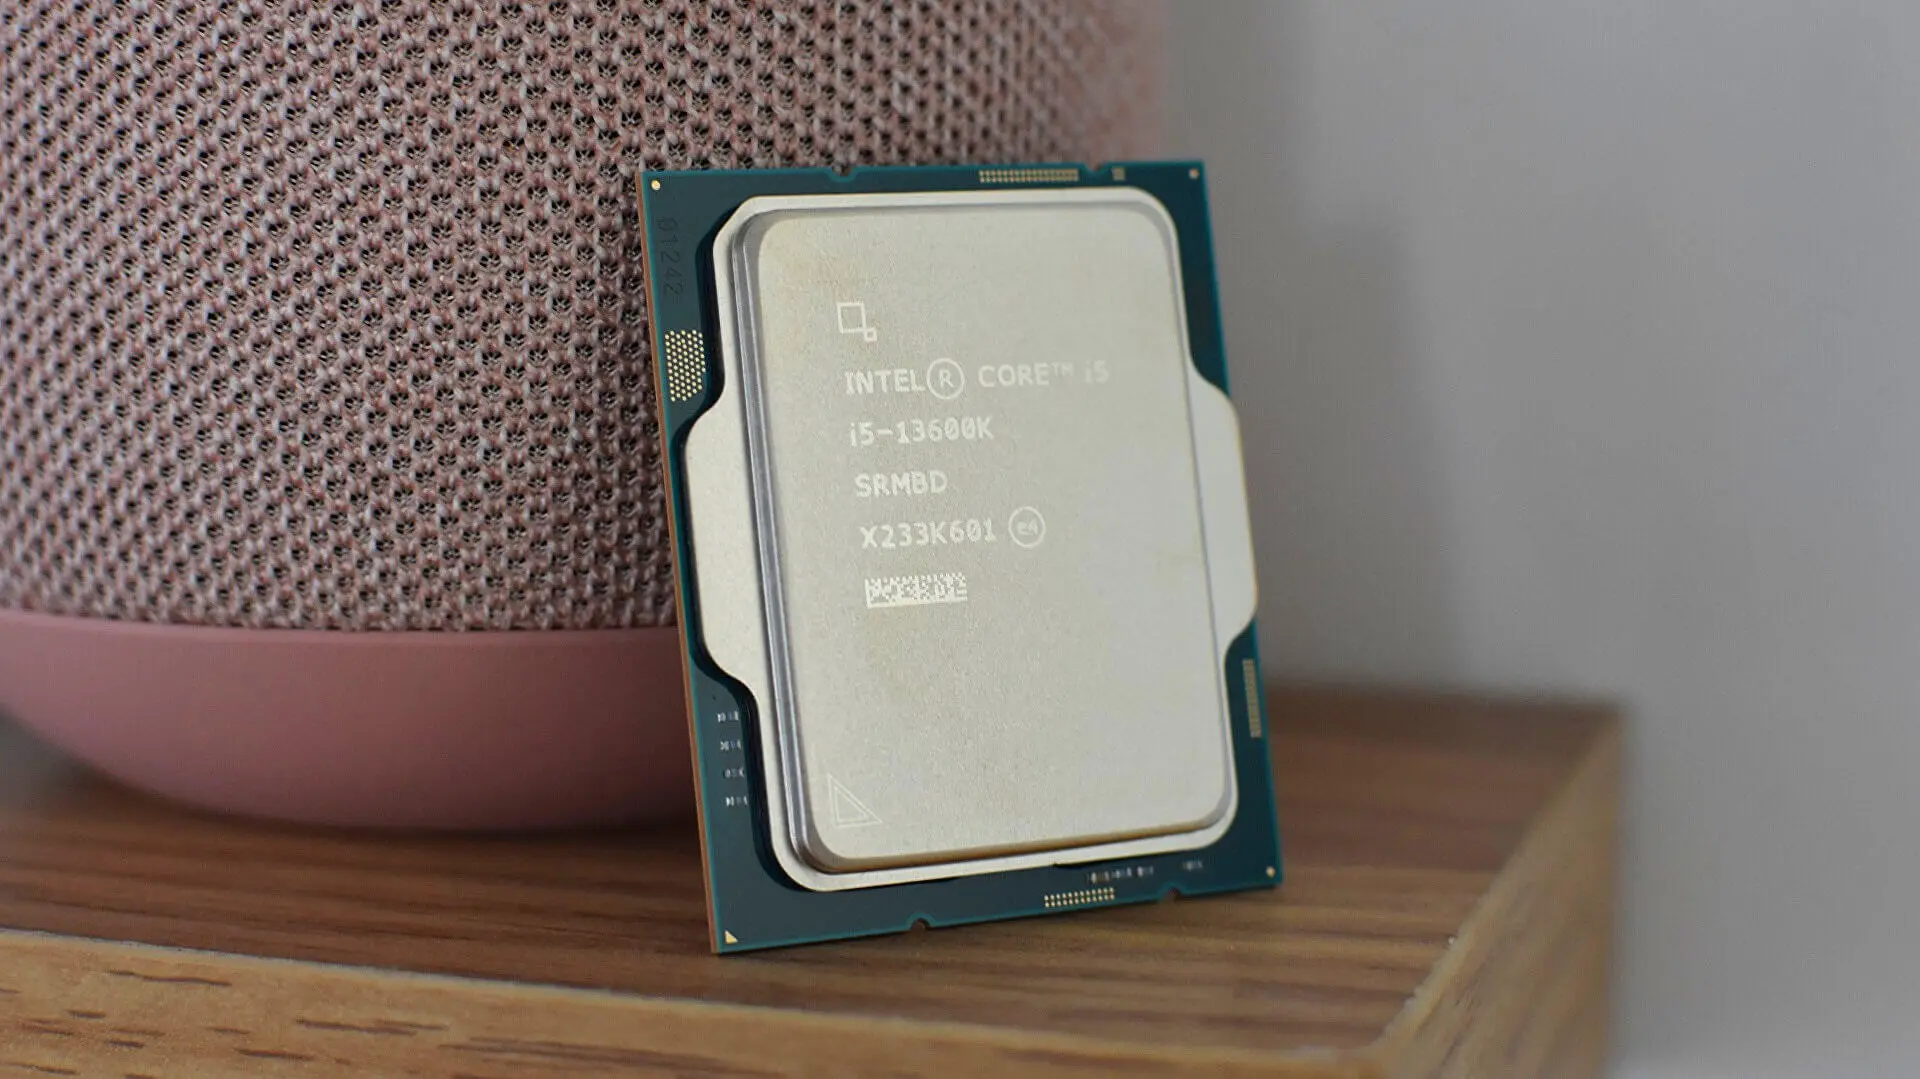 Intel i5-13600K surpasses AMD in terms of value. A great value processor for gaming and productivity